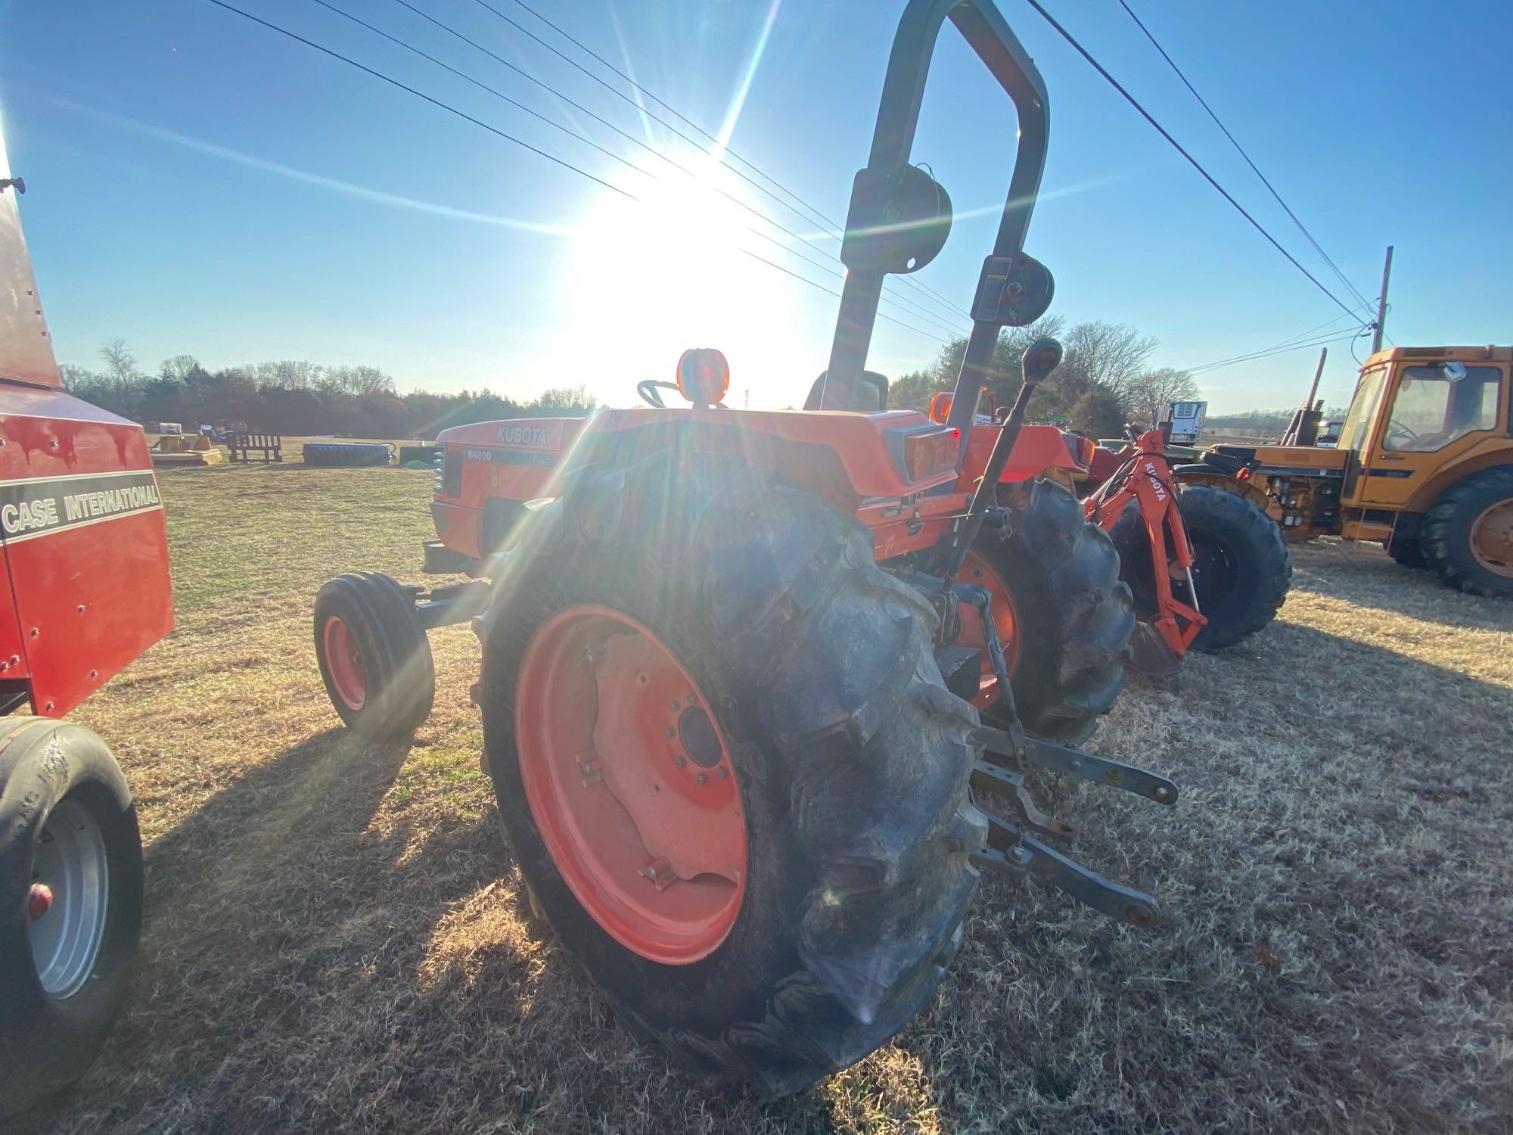 Image for Kubota M4800 2 WD Tractor, Low Hours:  1,118 Per Seller Tractor Runs Out Well